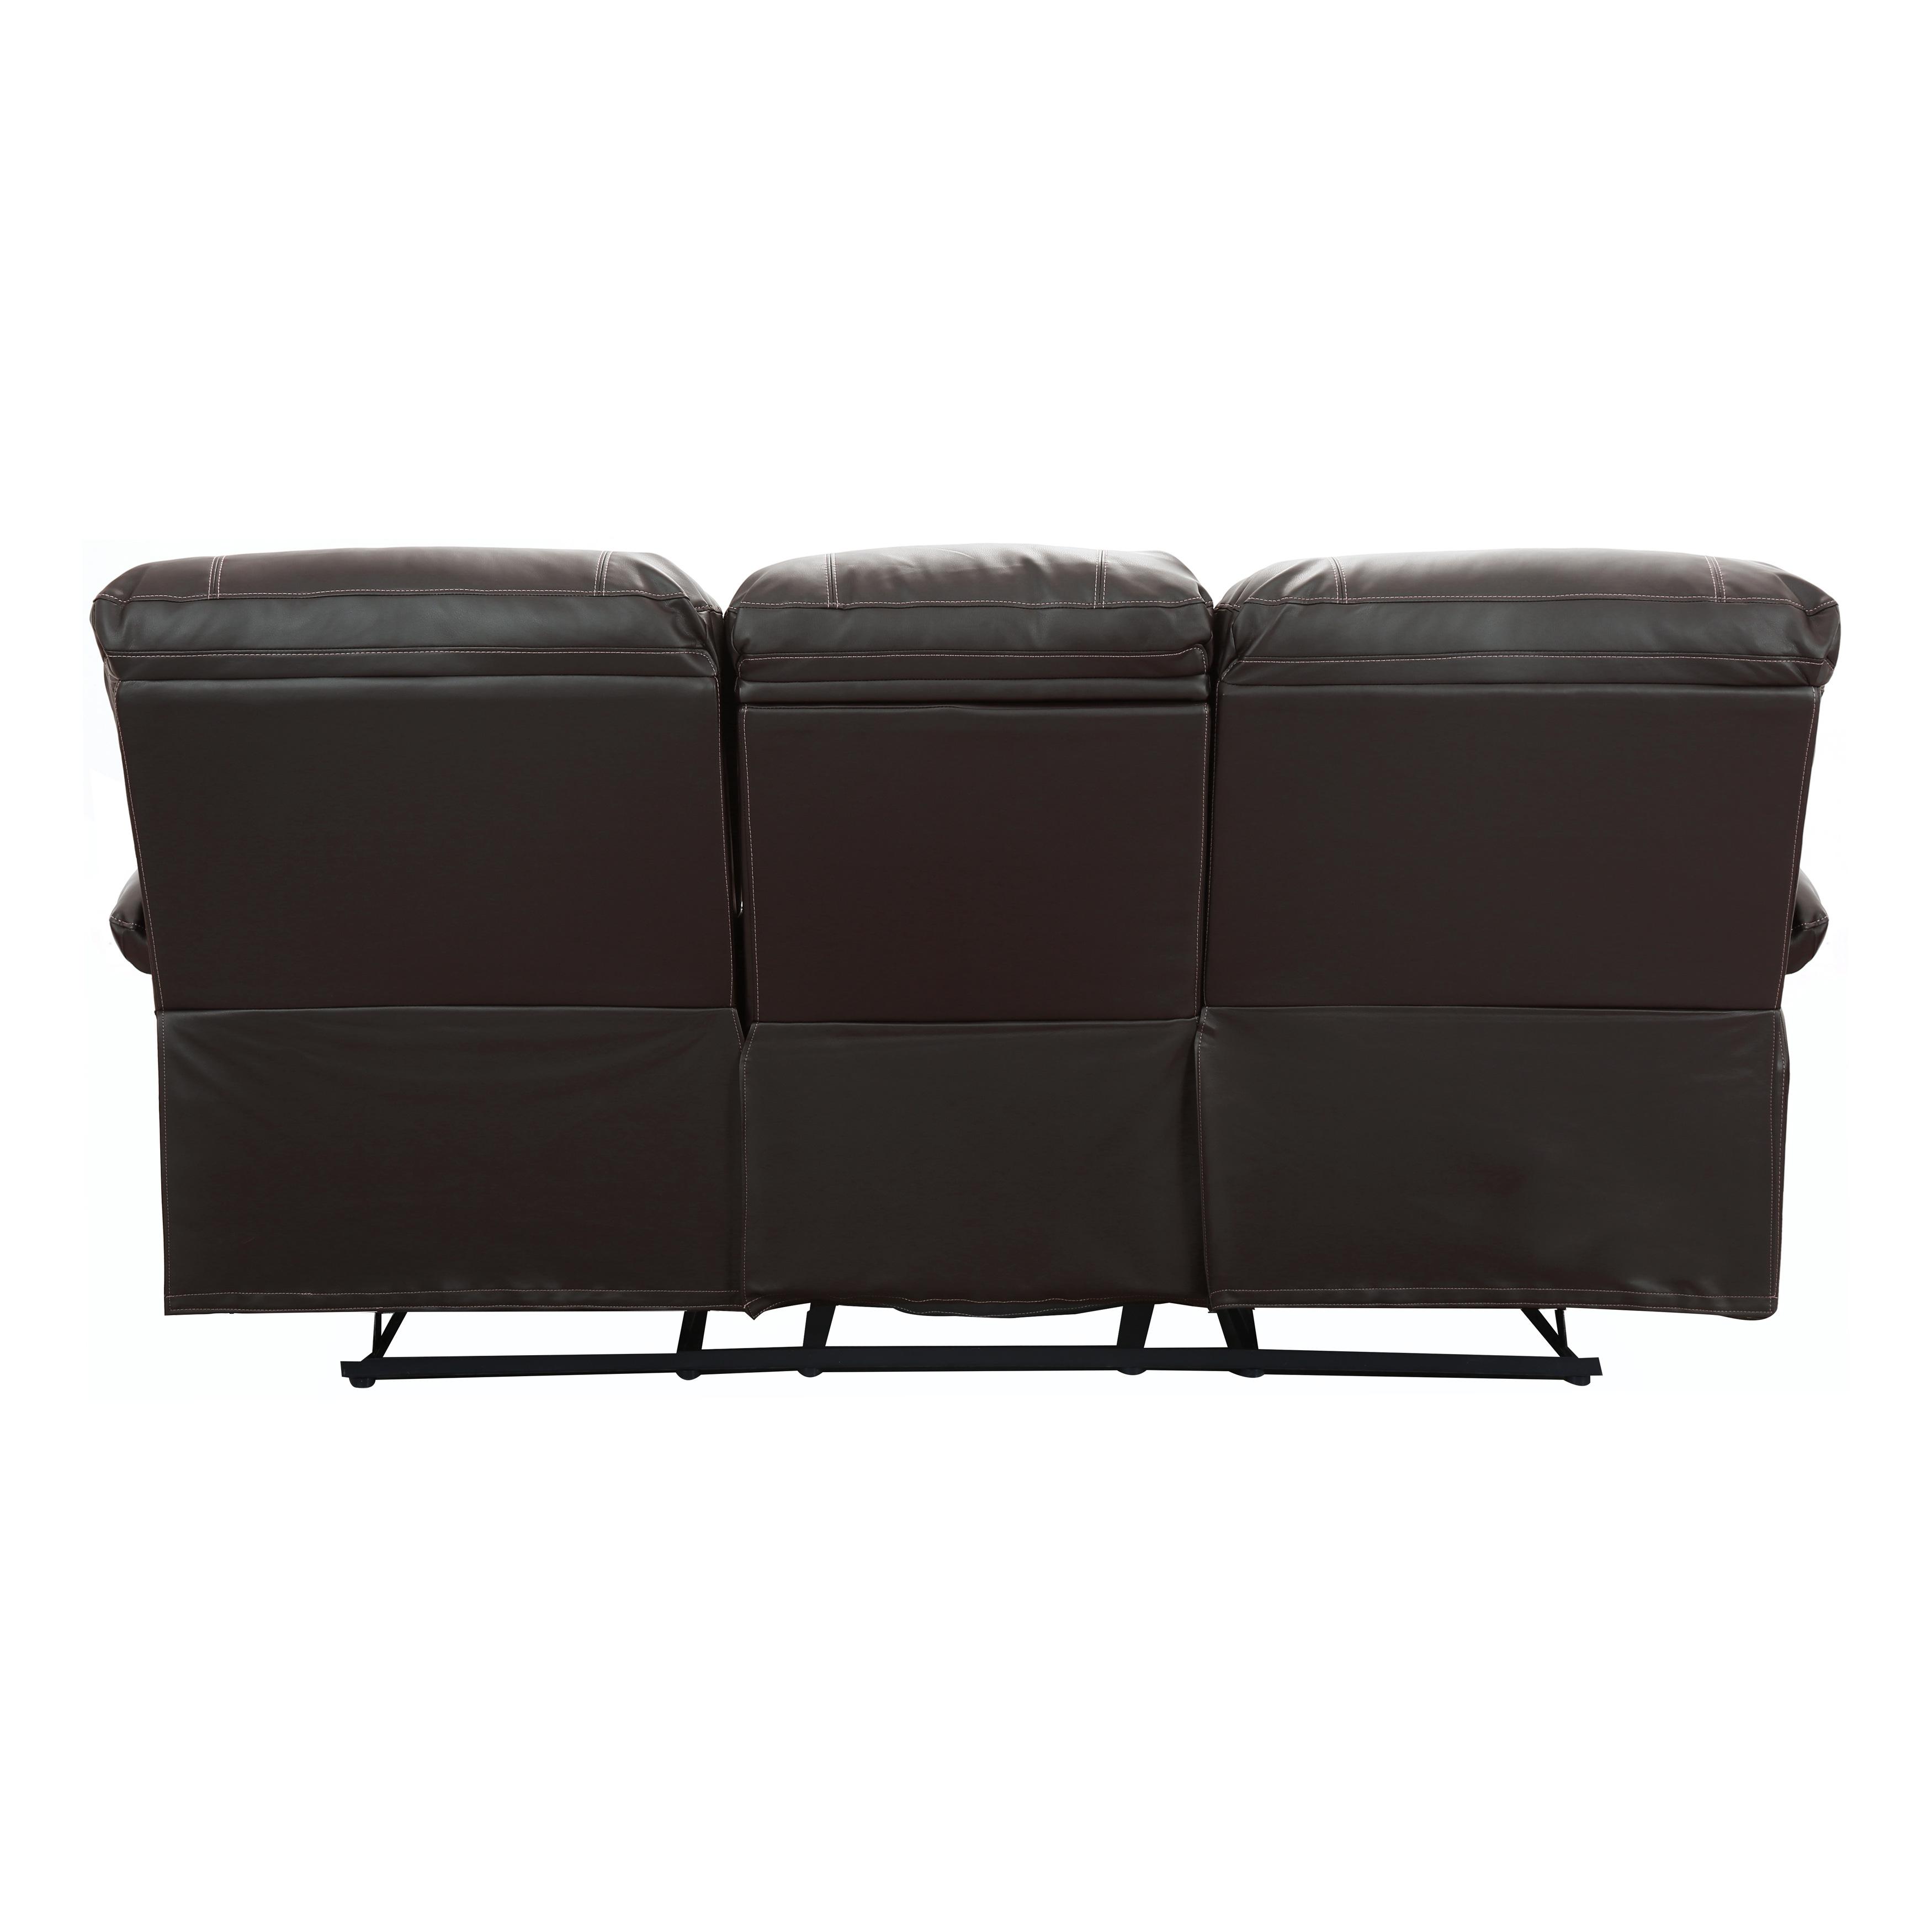 

        
Homelegance Cassville Loveseat 8403-2-L Reclining Loveseat Brown Faux Leather 21264658987567
